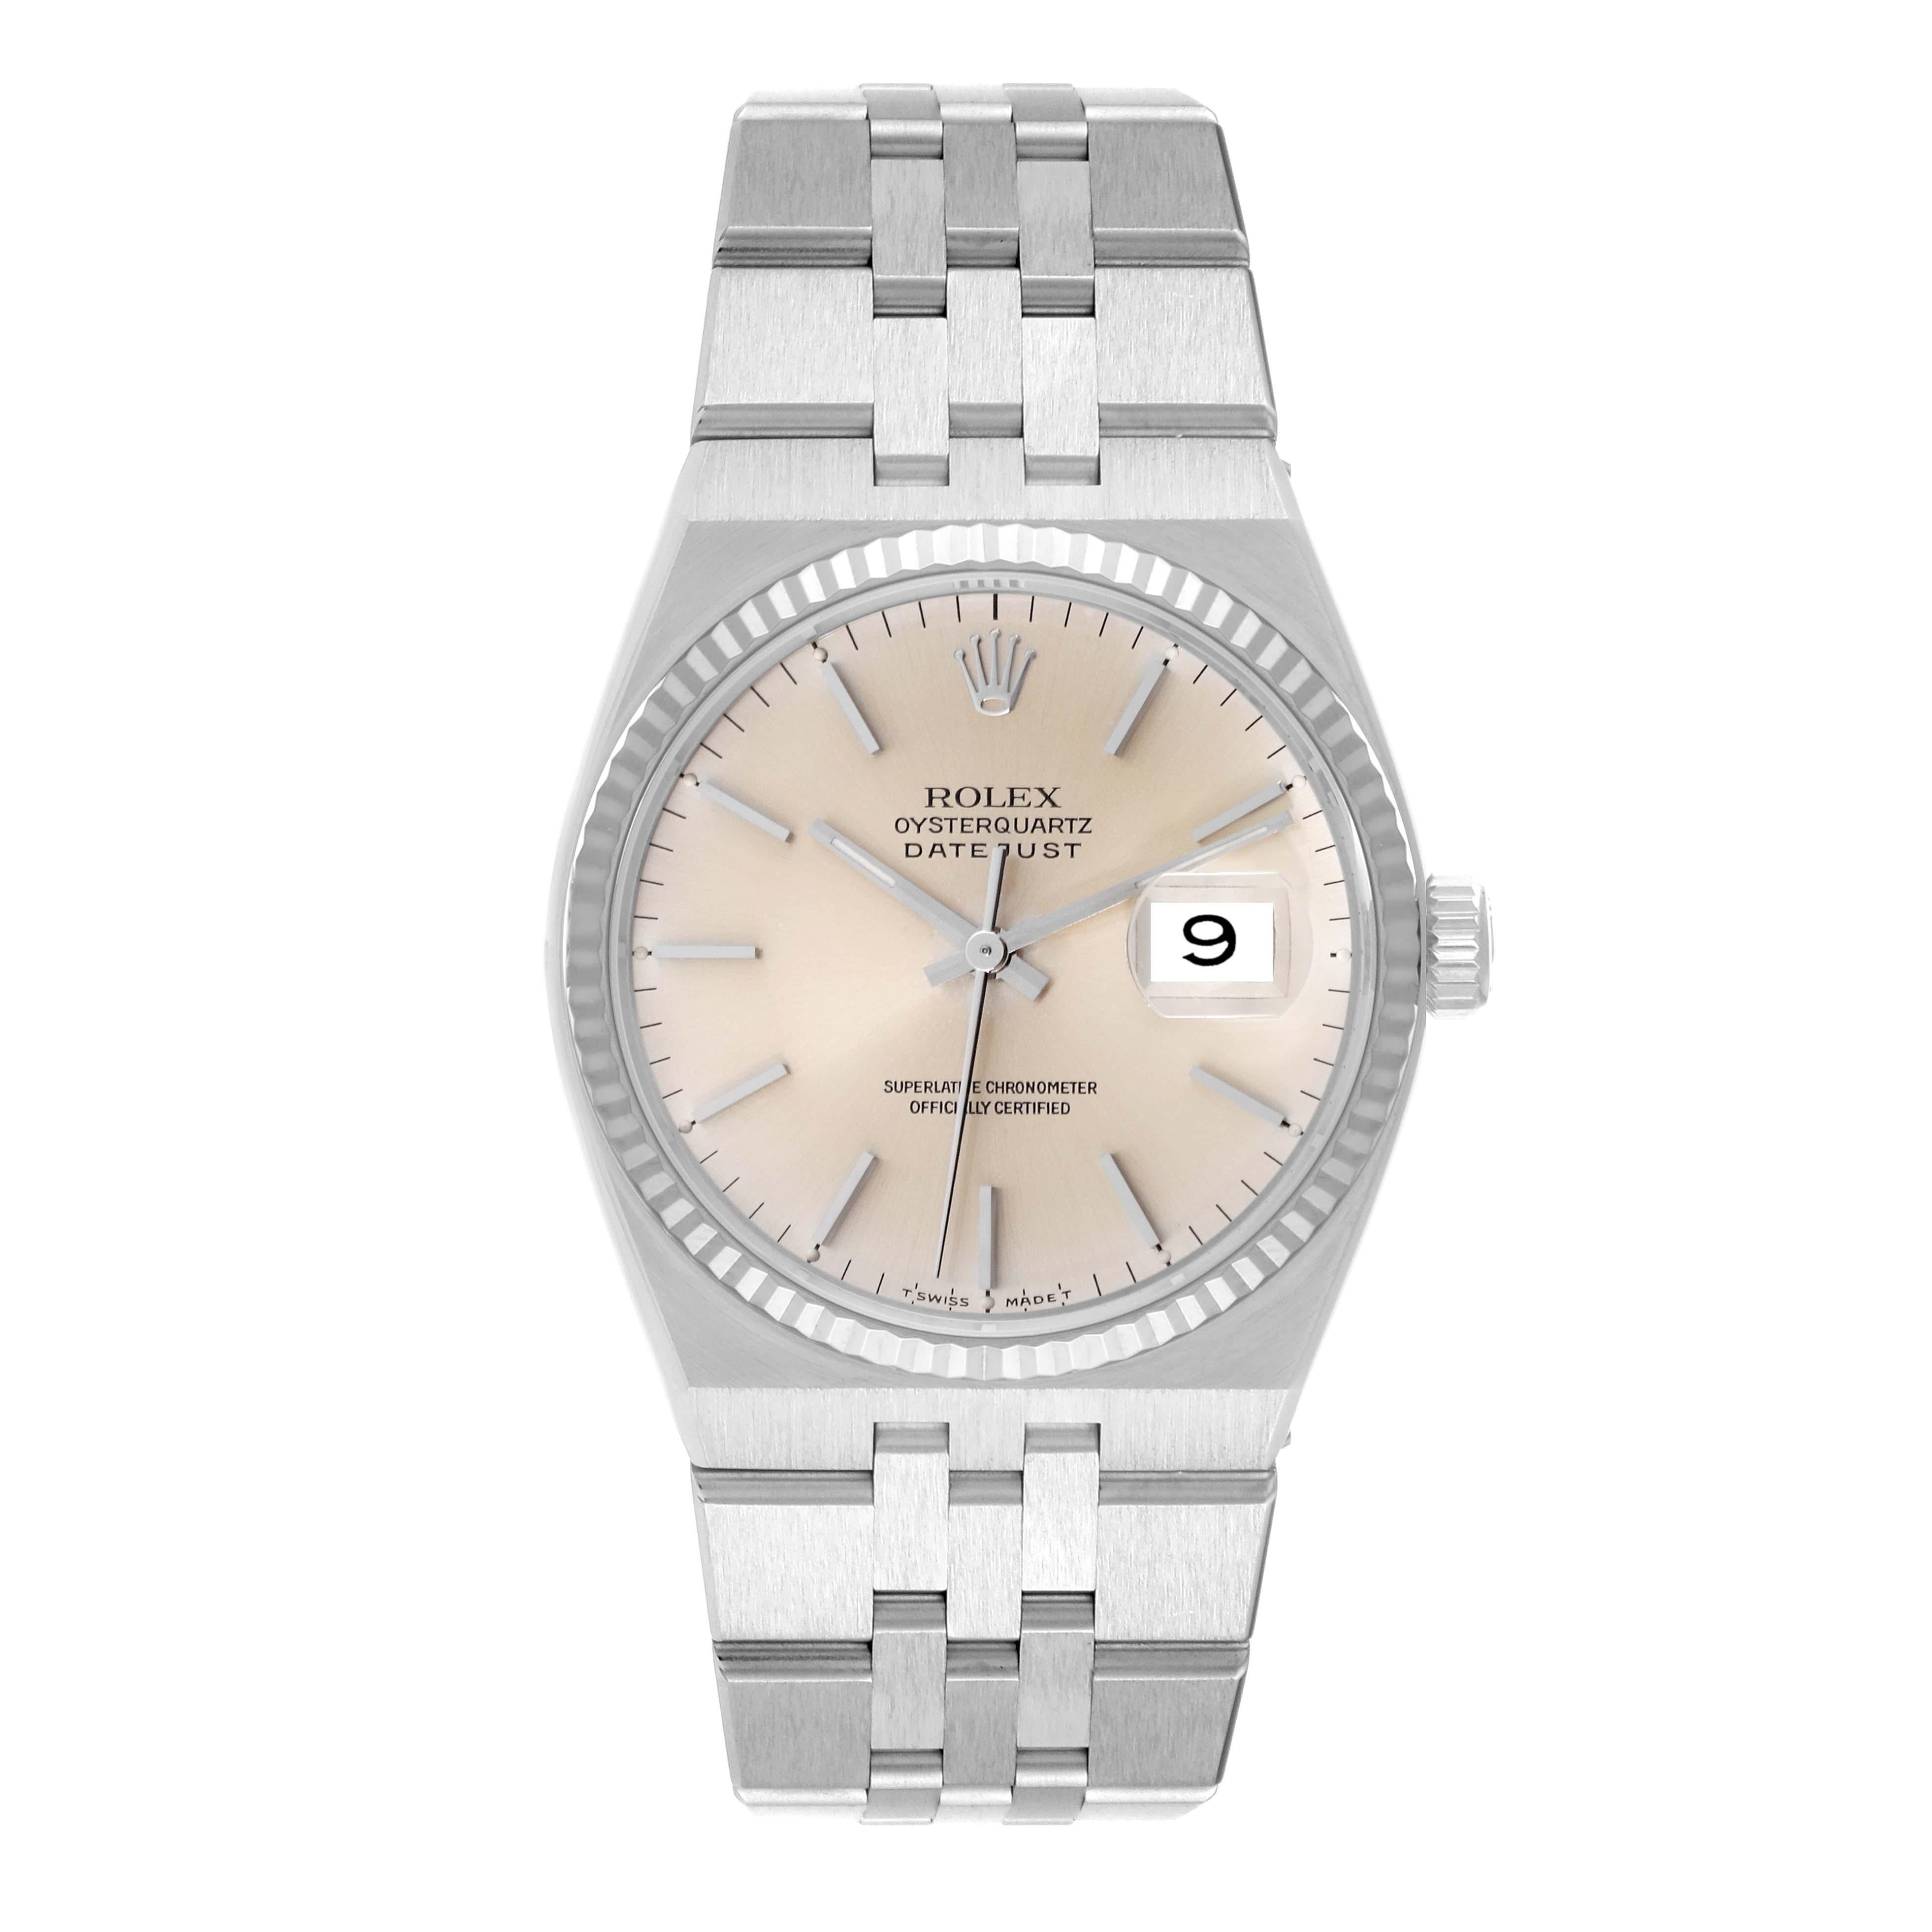 Rolex Oysterquartz Datejust Steel White Gold Mens Watch 17014 Box Papers. Quartz movement. Stainless steel oyster case 36.0 mm in diameter. Rolex logo on a crown. 18k white gold fluted bezel. Scratch resistant sapphire crystal with cyclops